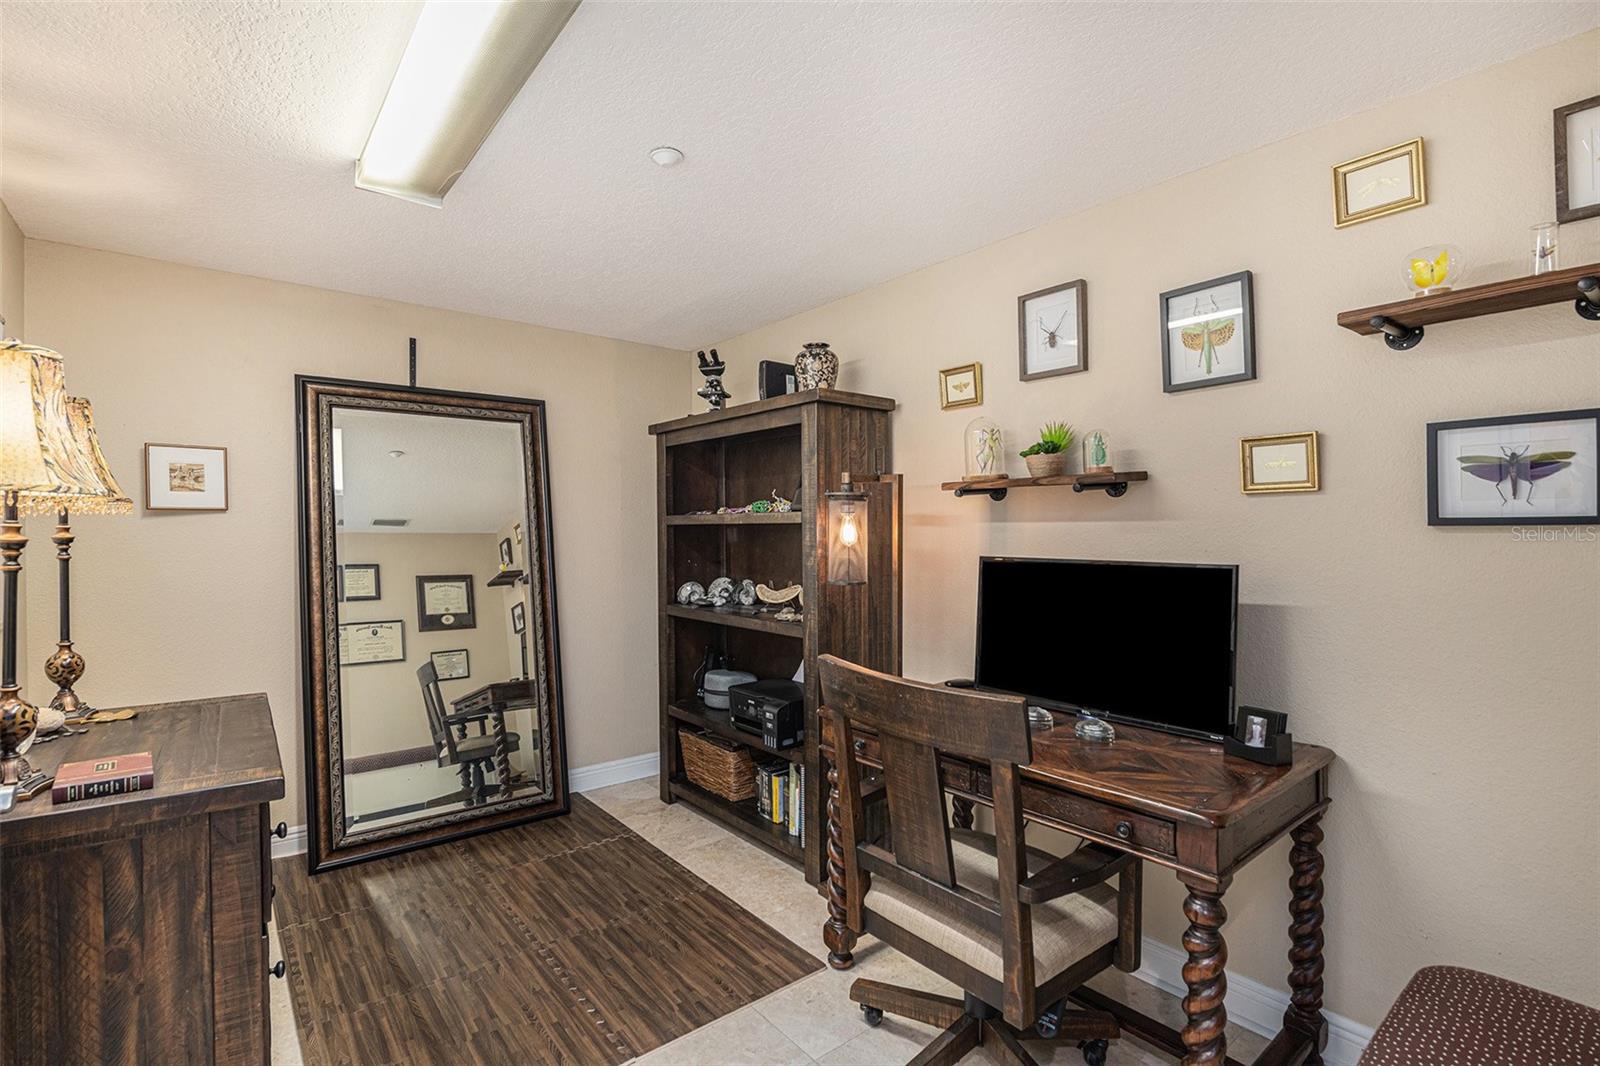 Bonus Room can be used as a den/office, kids play room, additional 4th bedroom and so much more!